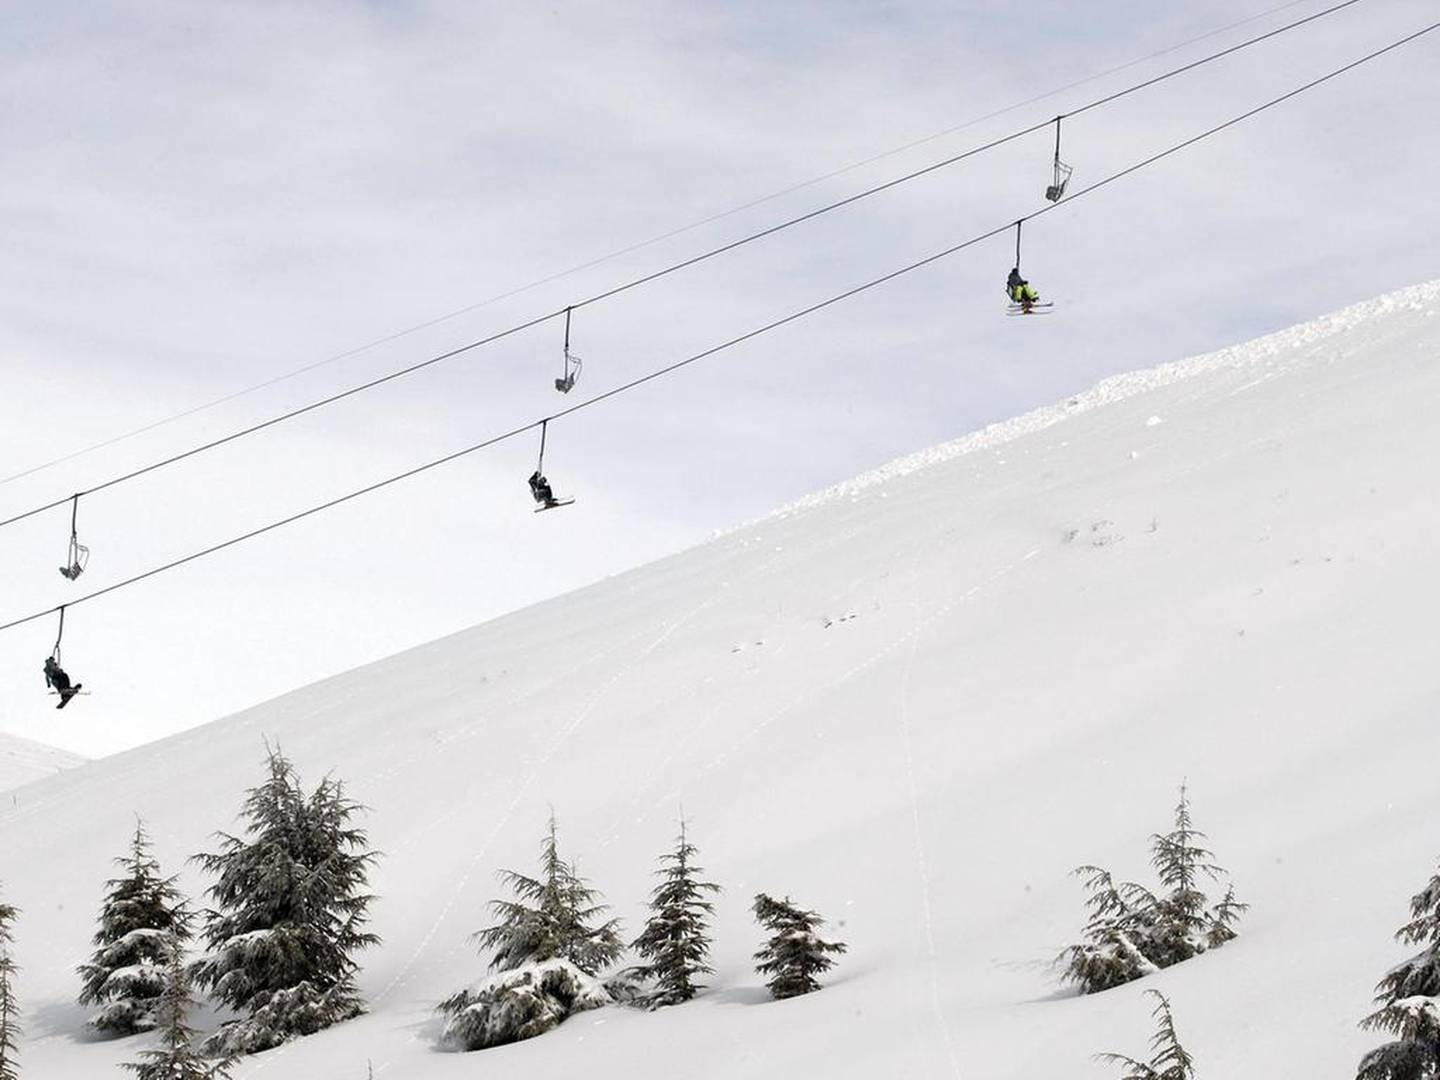 Skiers ride a lift at the Mzaar Ski Resort, one hour from Beirut, Lebanon. Getty Images